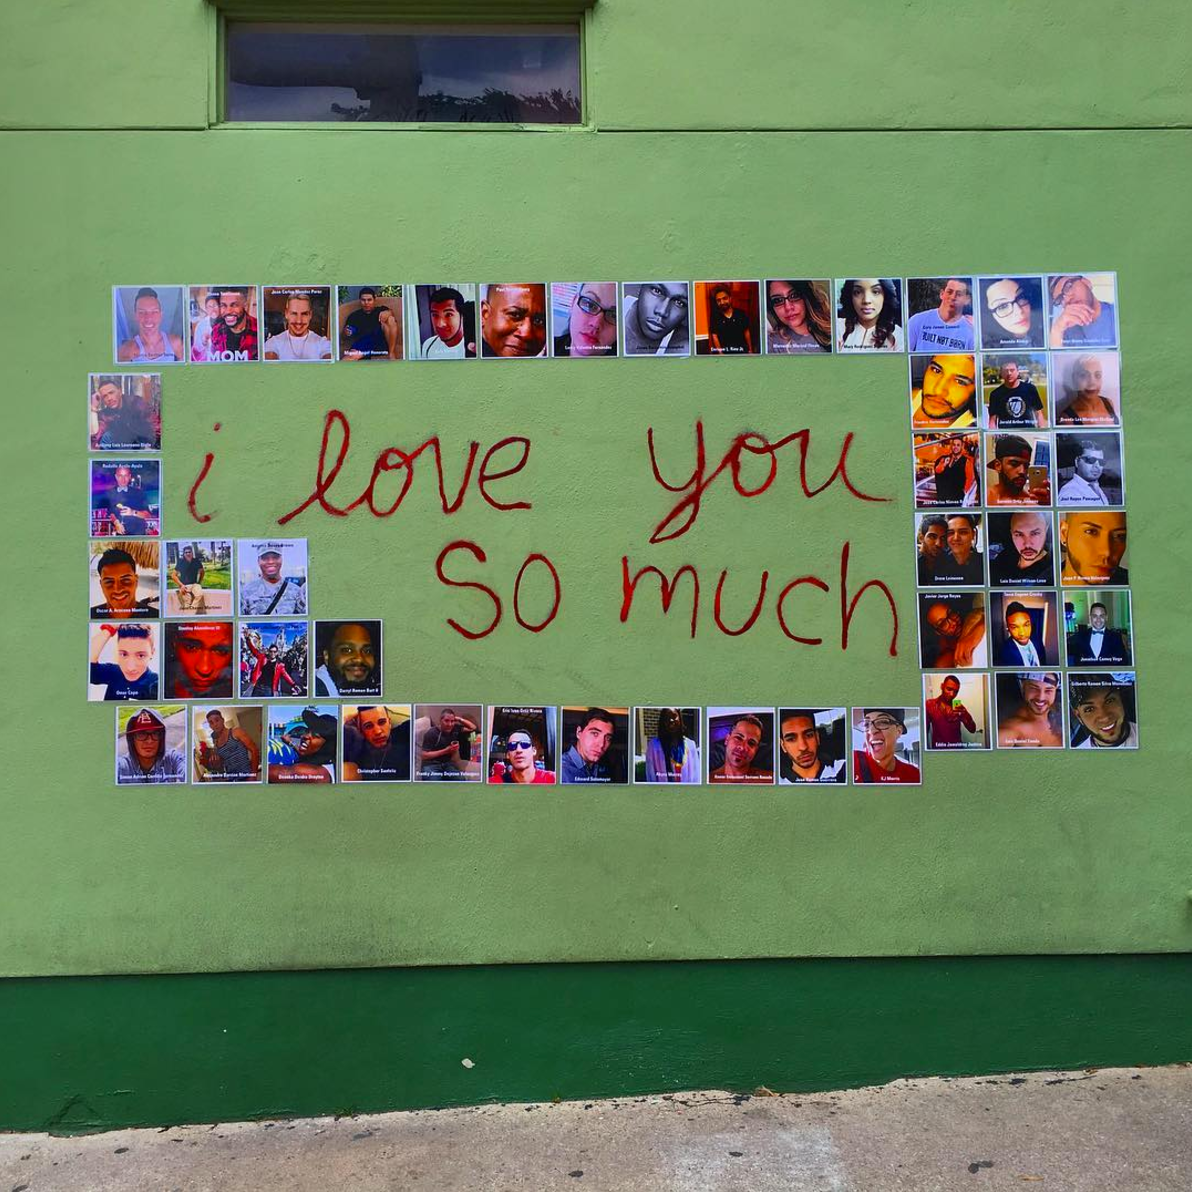 Austin S Iconic I Love You Wall Defaced Then Promptly Restored By Kelly Hannifin Sealab Life